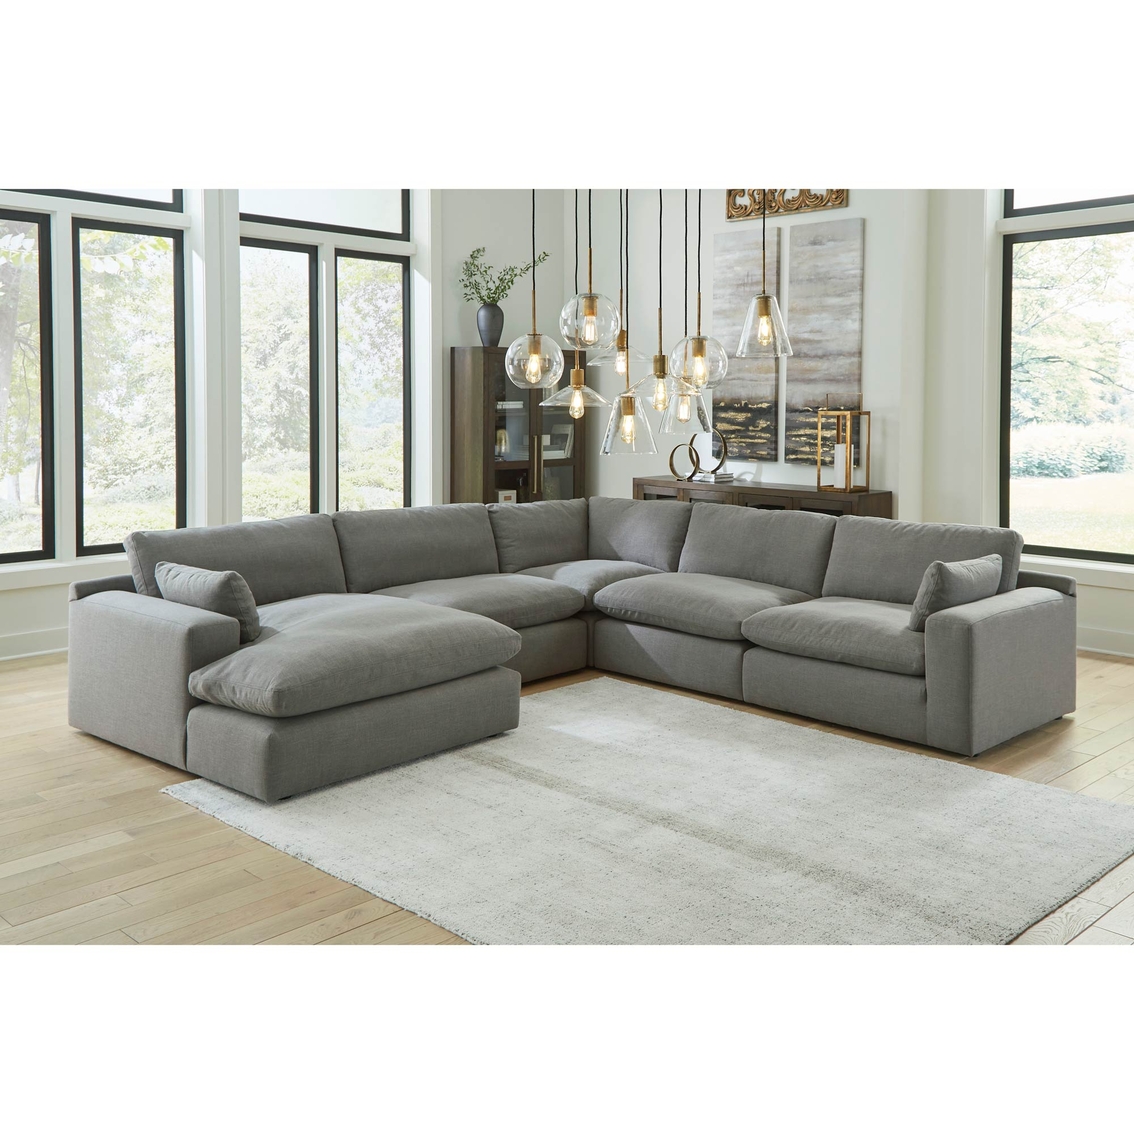 Millennium by Ashley Elyza 5 pc. Sectional with Chaise - Image 2 of 3